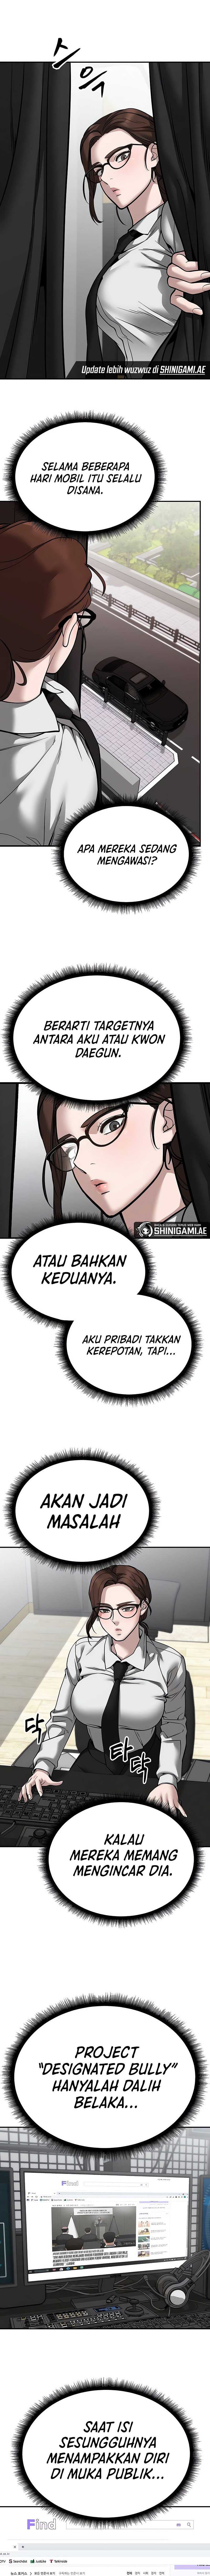 The Bully In Charge Chapter 96